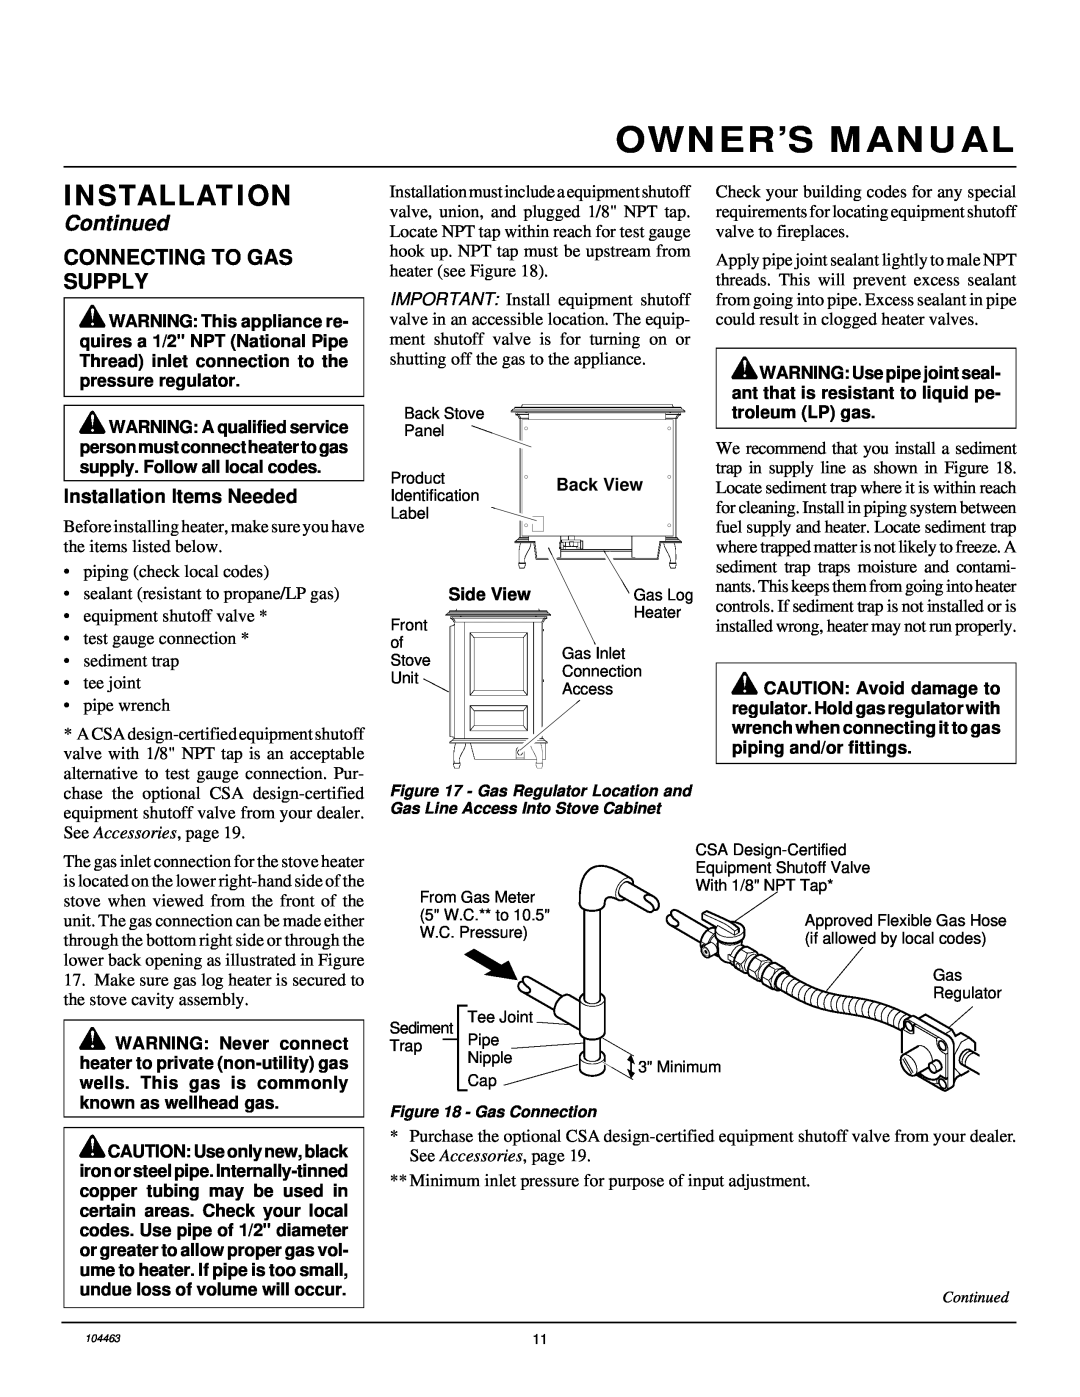 Desa Tech SL30NT installation manual Continued, Connecting To Gas Supply, Installation Items Needed 